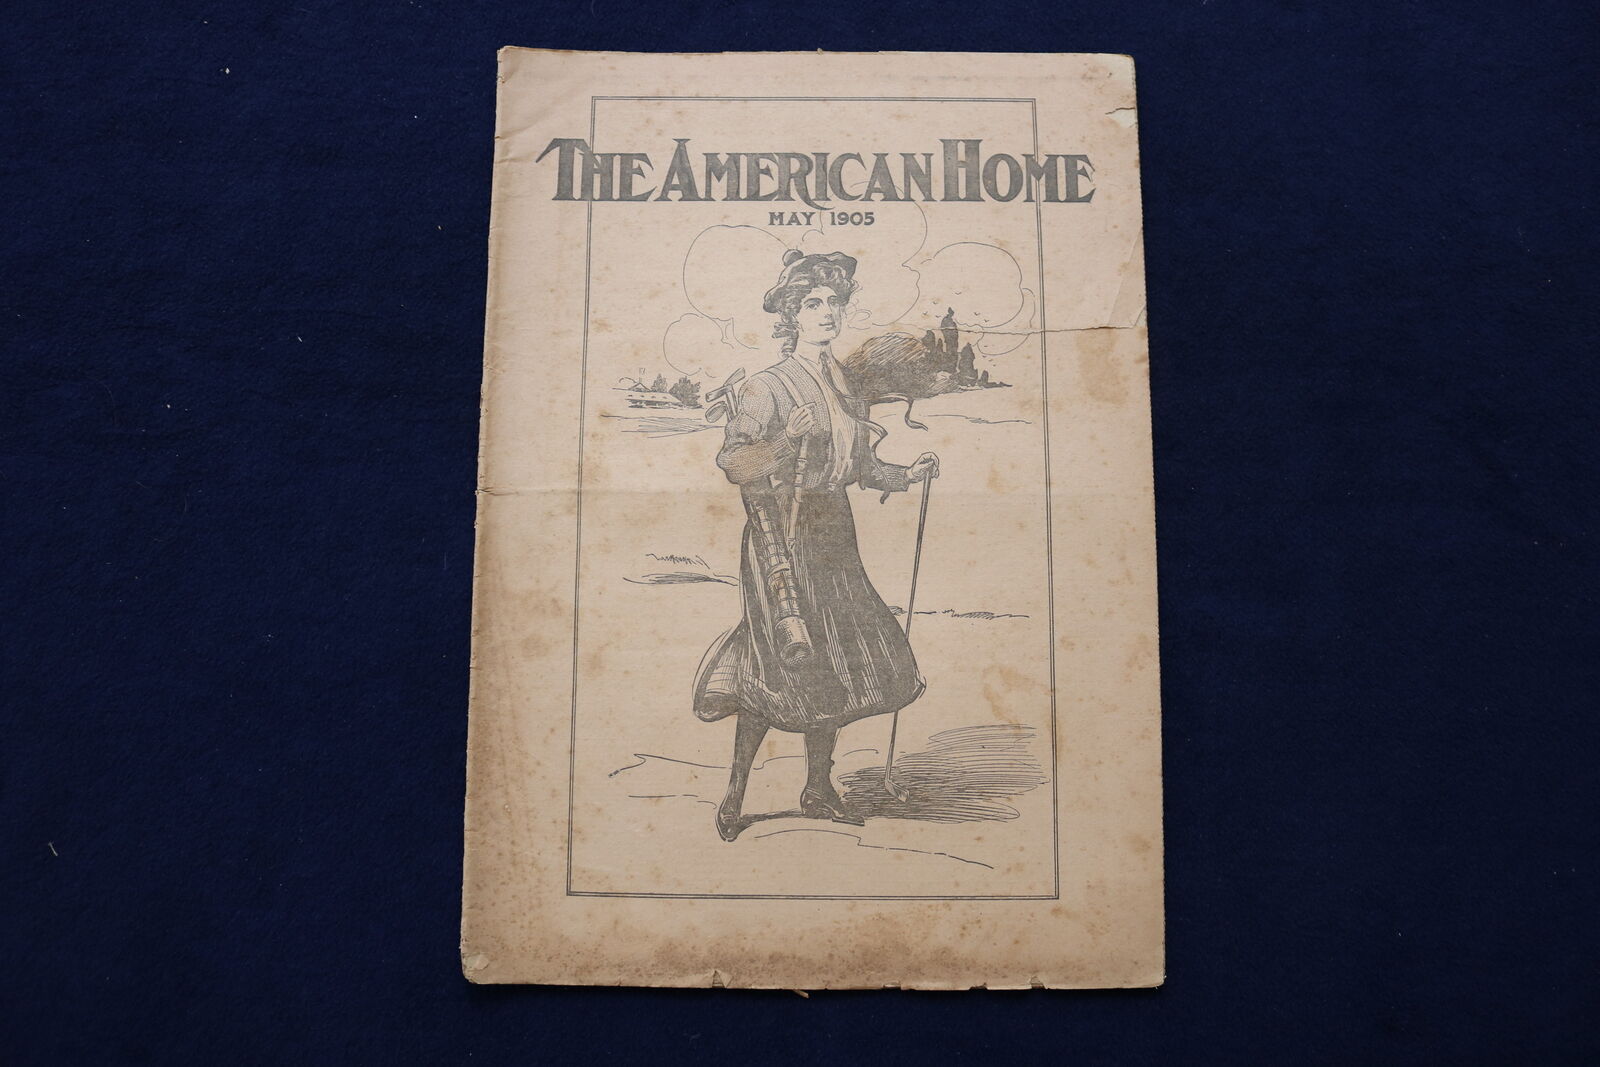 1905 MAY THE AMERICAN HOME NEWSPAPER - NICE ILLUSTRATED COVER - NP 8679